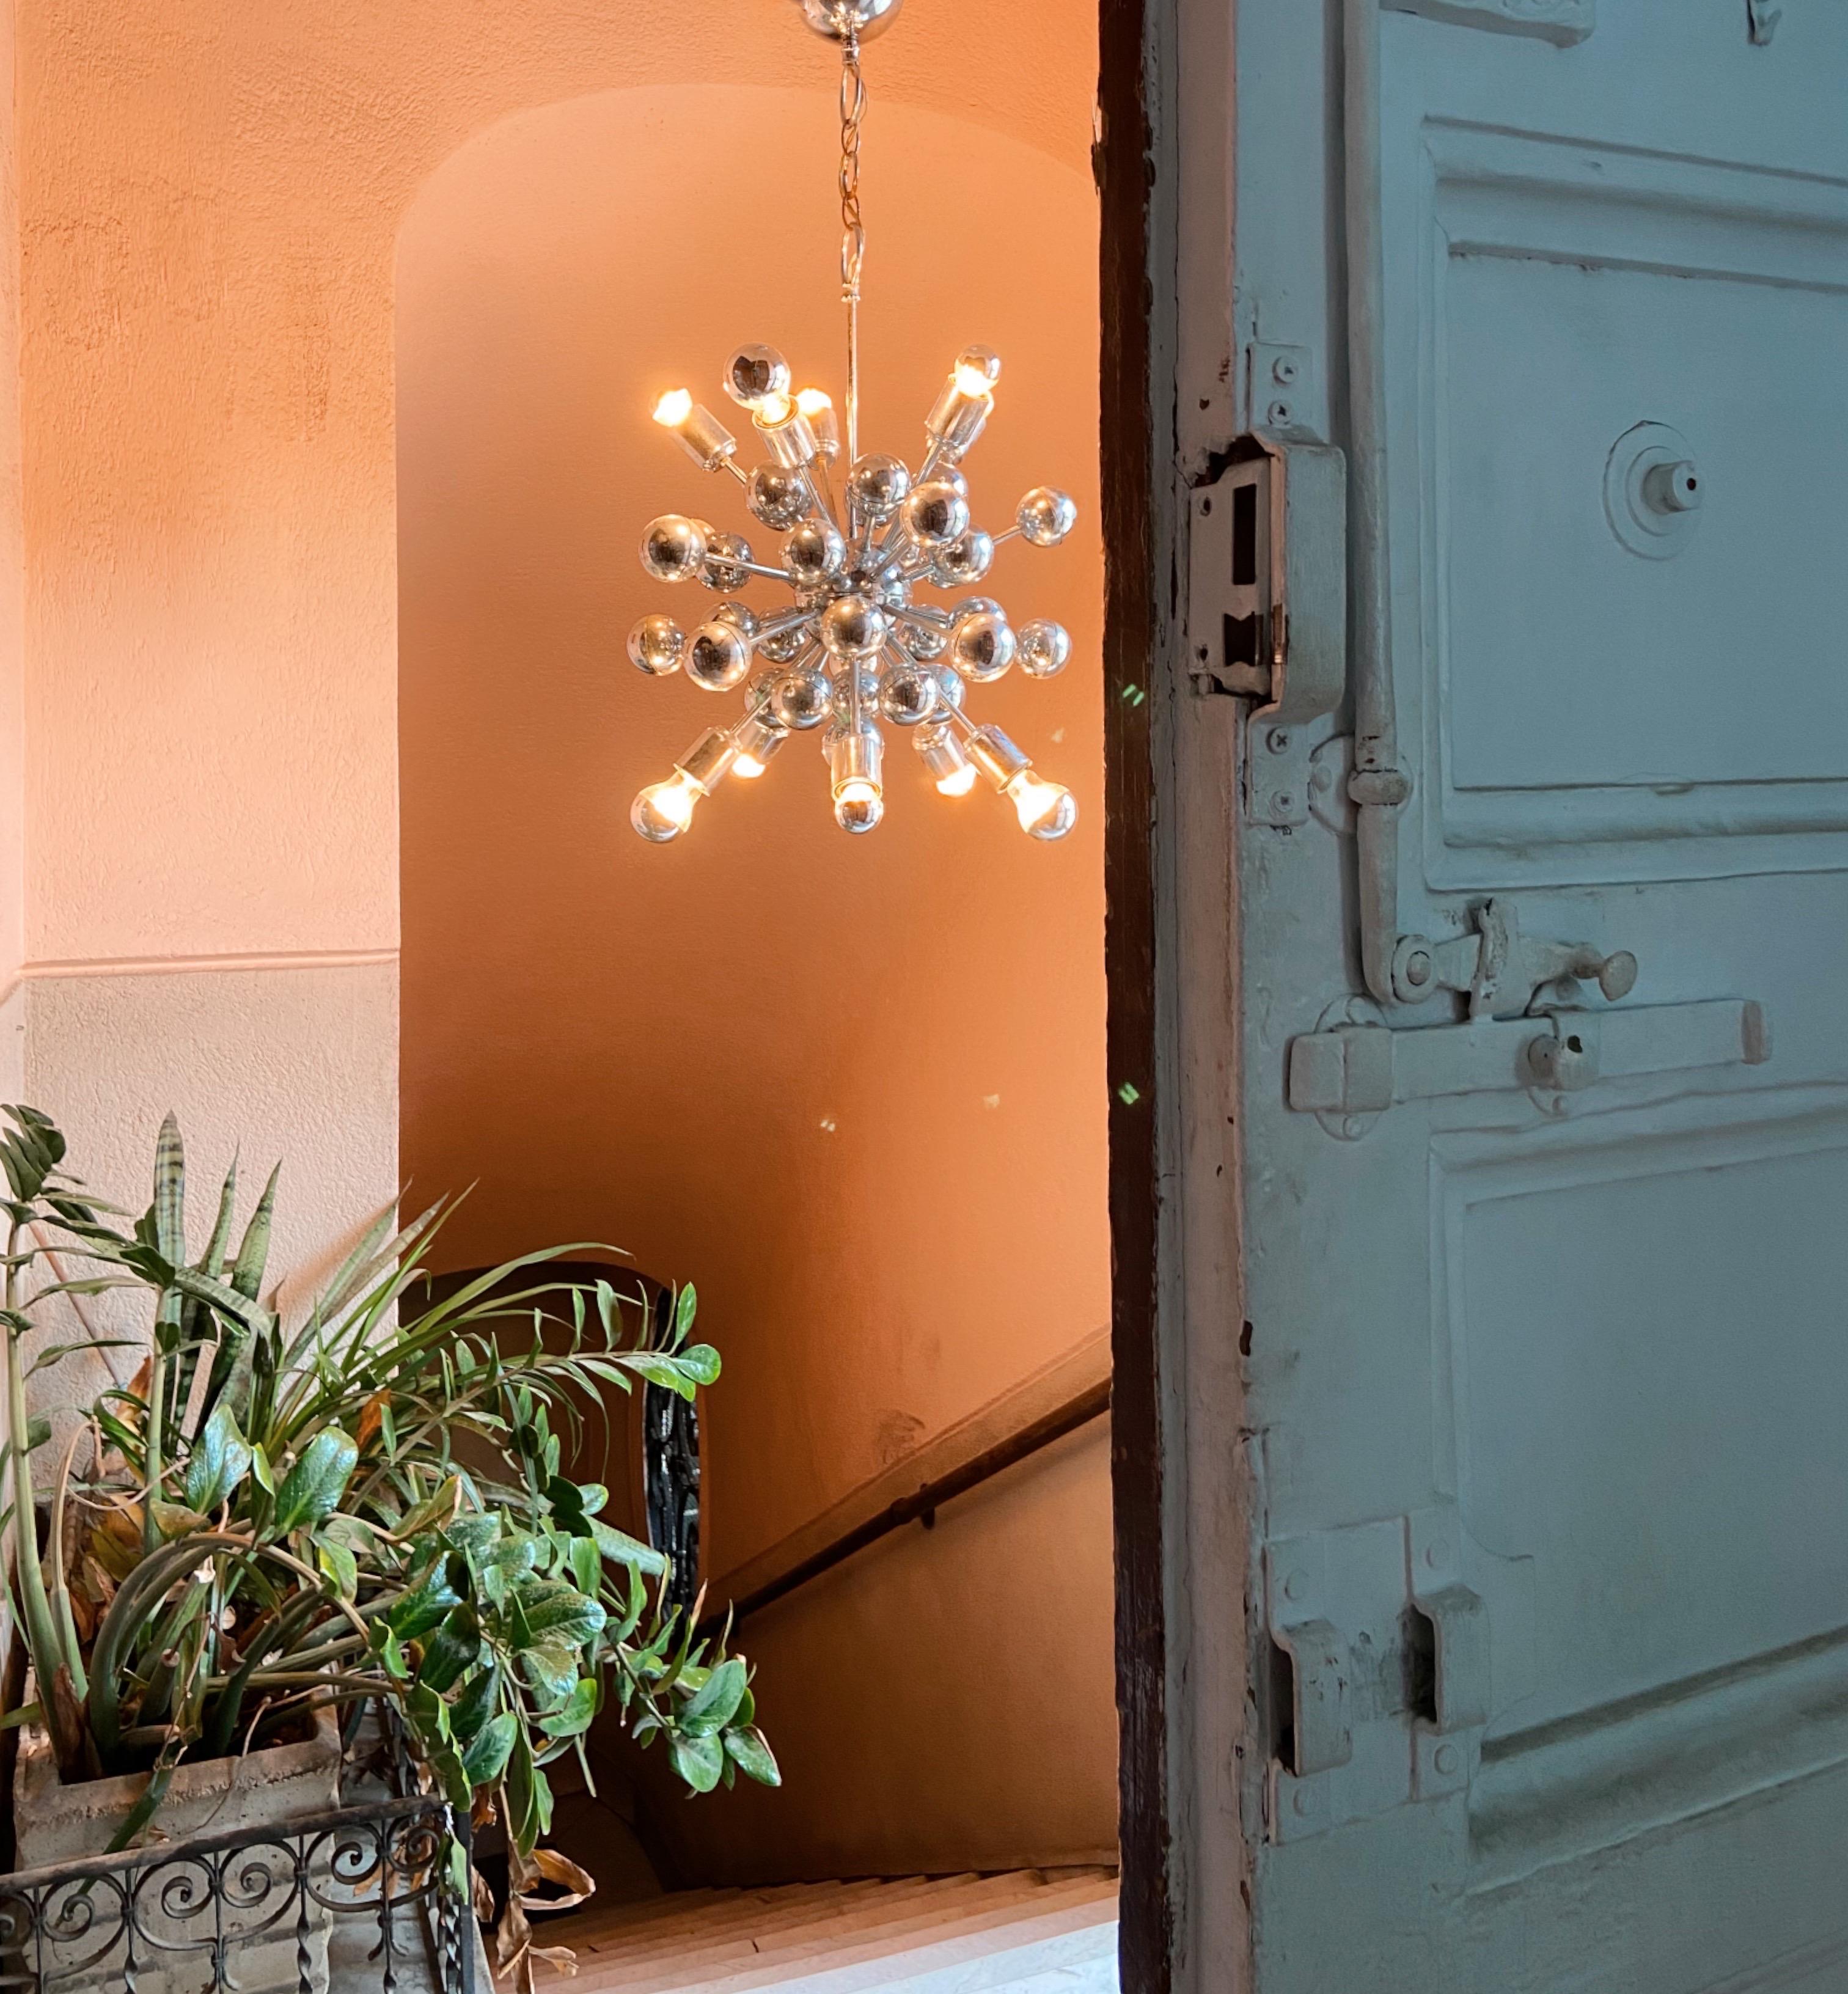 Introducing the Sputnik Chandelier: A Timeless Masterpiece designed by the iconic Goffredo Reggiani
Illuminate your space with this true gem by the iconic Italian designer Goffredo Reggiani. Crafted in Italy during the vibrant 1960s, this chromed